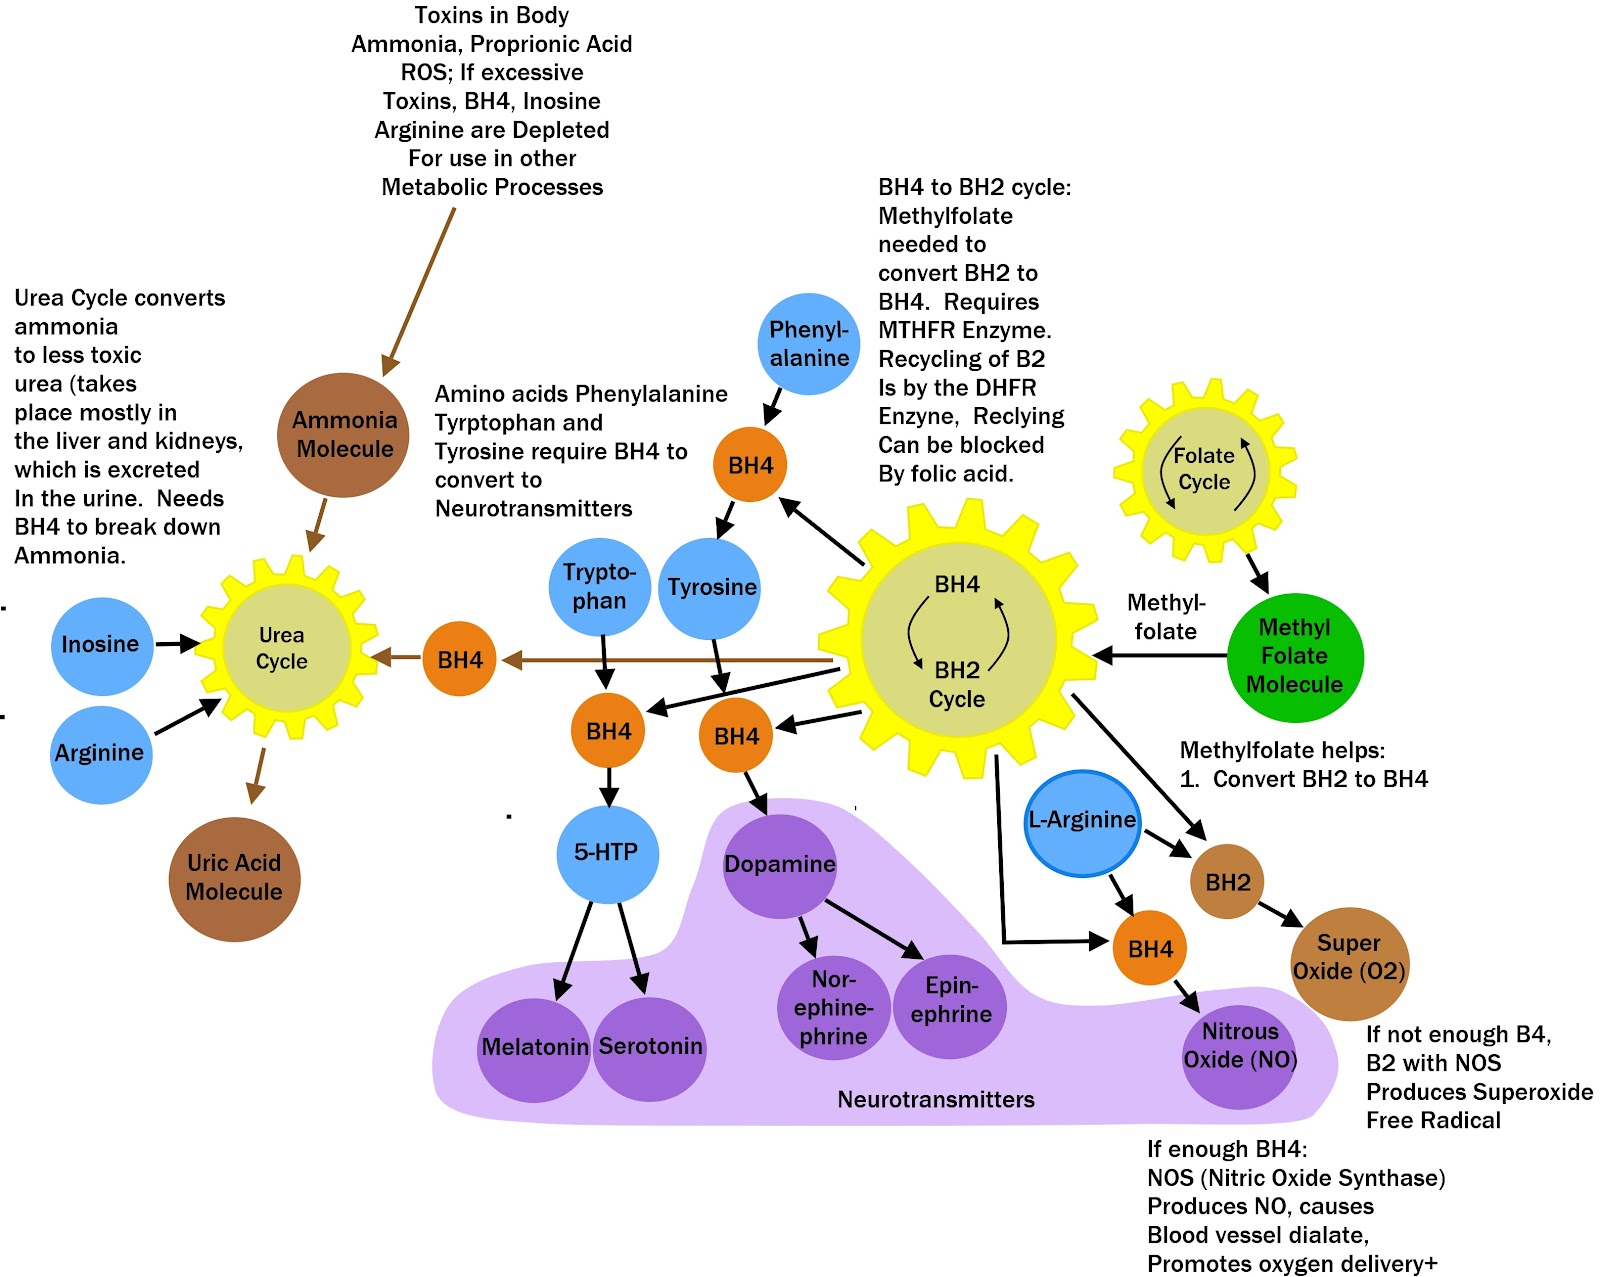 Commonly Disrupted Metabolic Pathways 2 - 1 of 2.jpg